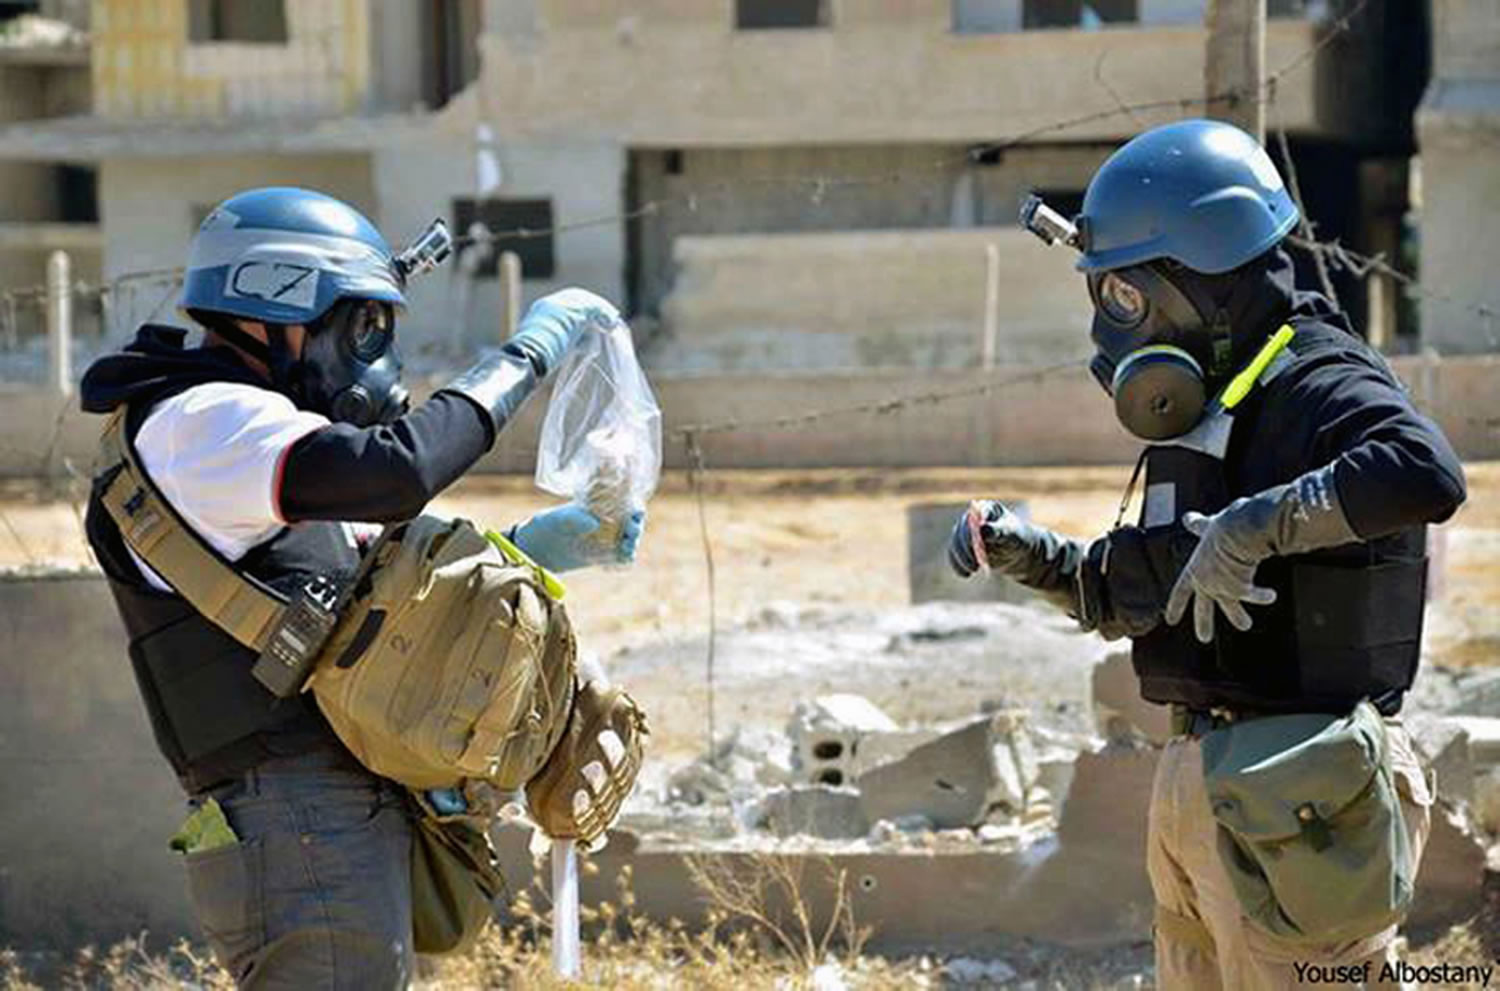 Members of the United Nations investigation team take samples from sand near a part of a missile that is likely to be a chemical rocket, according to activists, in the Damascus countryside of Ain Terma, Syria.